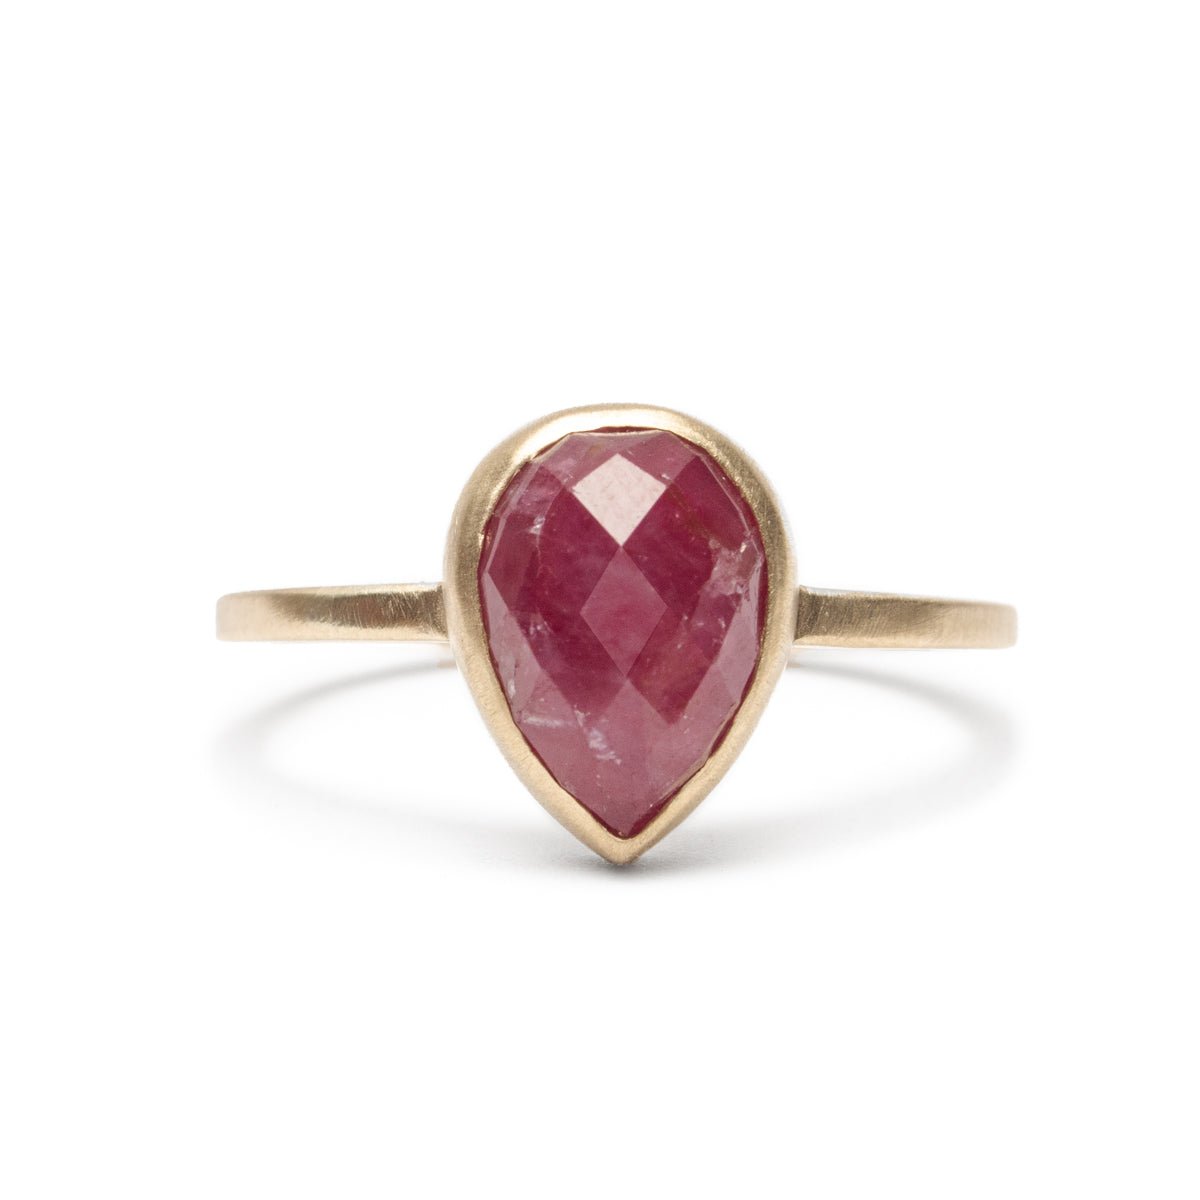 A conflict-free pear-shaped rose cut ruby set in a narrow 14k yellow gold band with a matte finish. The Pirum Ring is designed by Betsy & Iya and handcrafted in Portland, Oregon. 